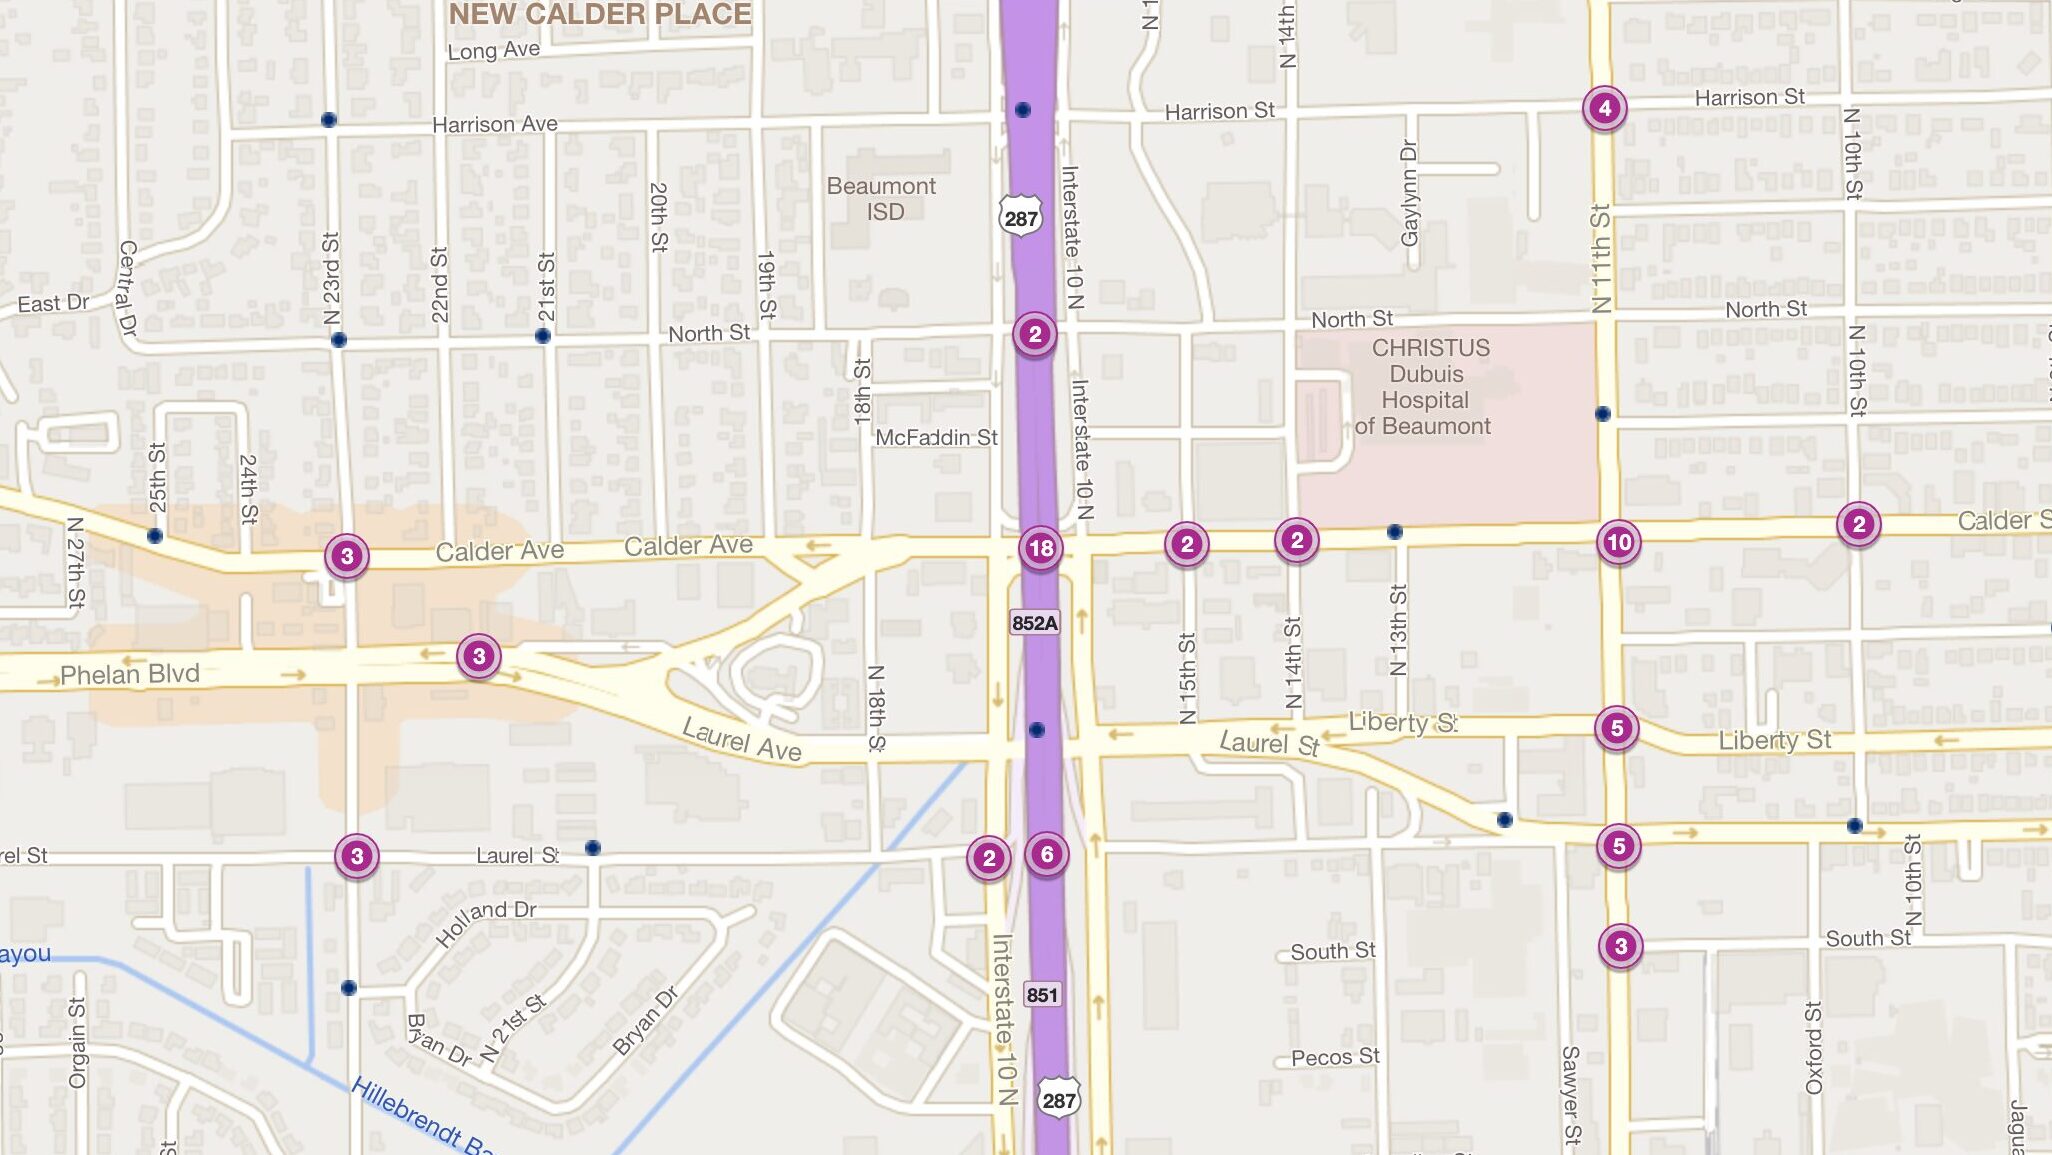 Cluster Map of 2023 Car Accidents at I-10 & Calder Ave. (TXDOT)